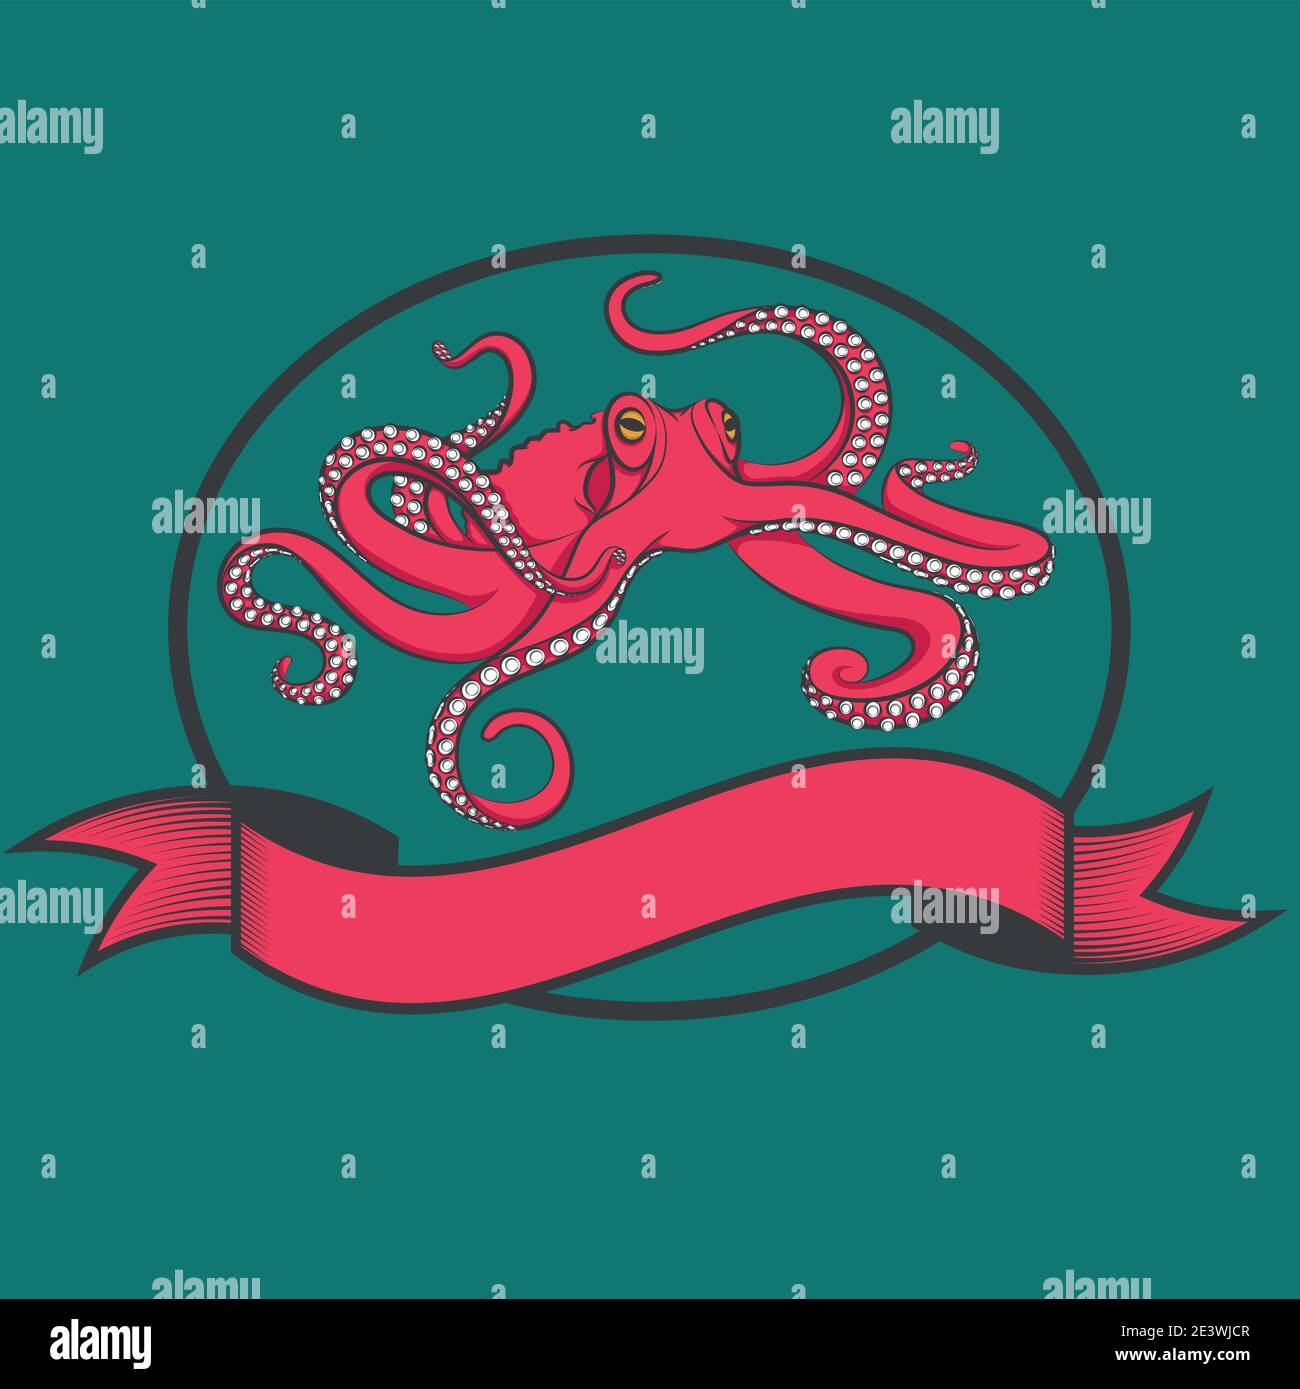 Color vector images of red octopus. Isolated vector object. Stock Vector